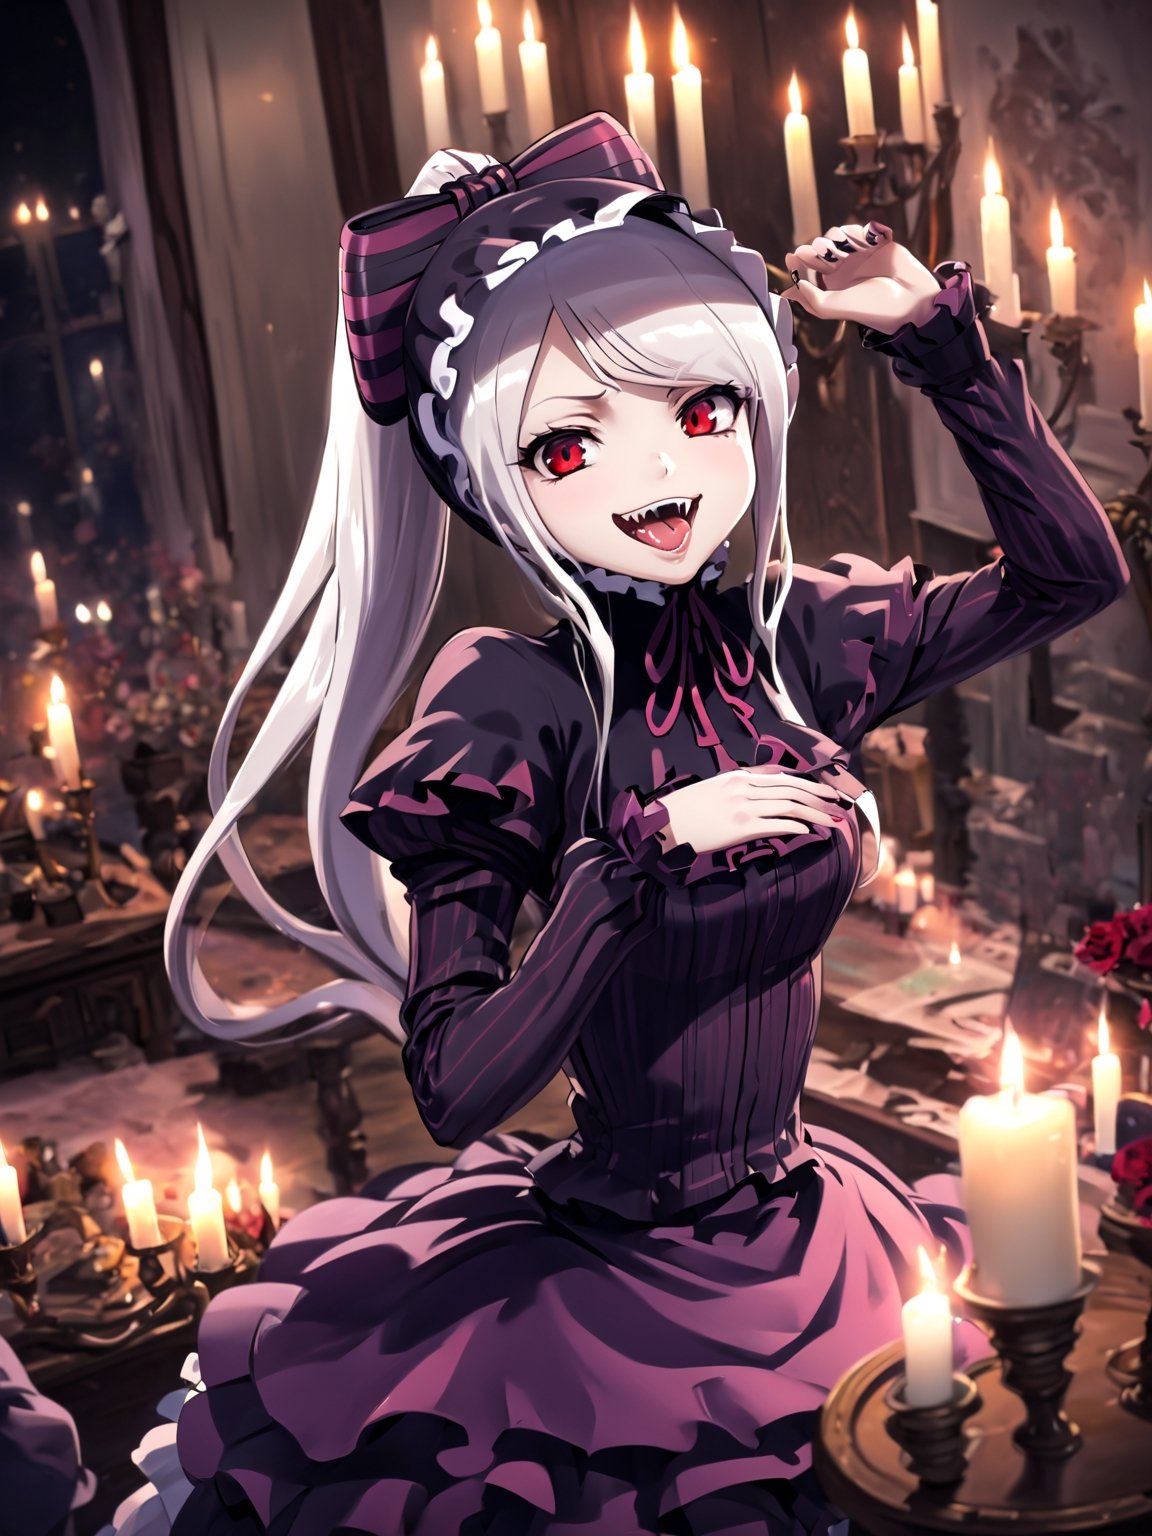 //Quality,
masterpiece, best quality, detailed
,//Character,
1girl, solo,shalltear bloodfallen \(overlord\), red eyes, long hair, white hair, bangs, ponytail
,//Fashion,
gothic lolita, striped bow, frilled dress, long sleeves
,//Background,
night, candle lit room
,//Others,
open mouth, tongue, fangs, smile, ridicule